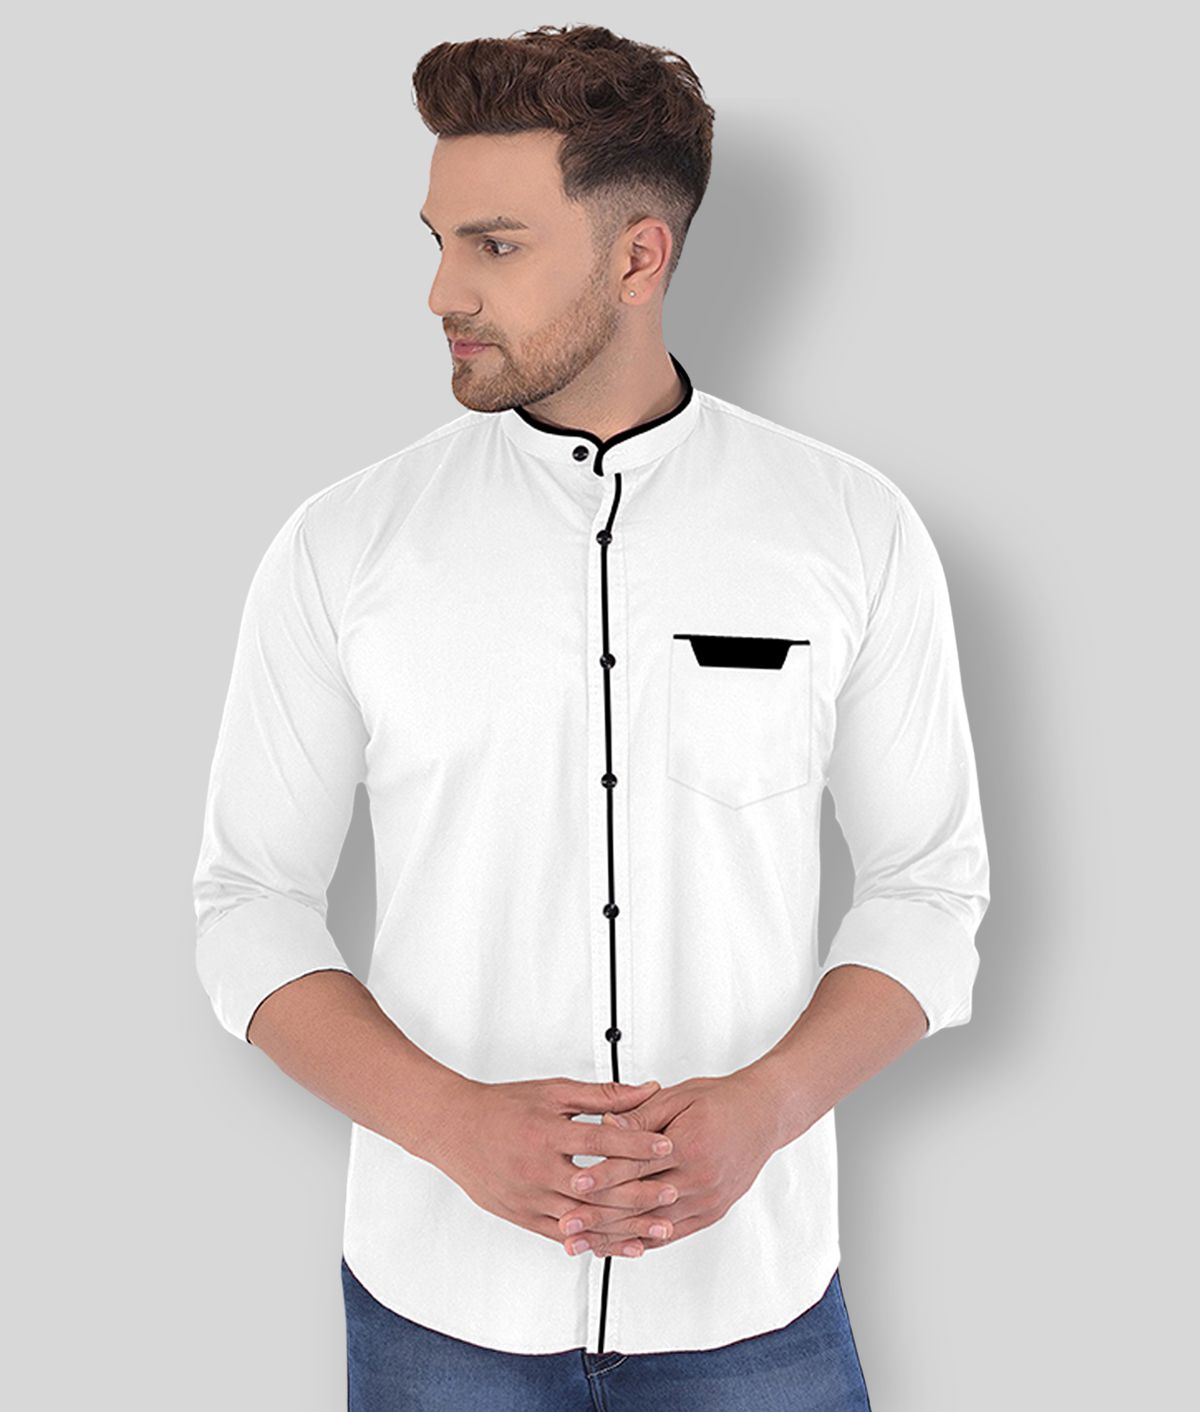     			P&V CREATIONS - White Cotton Blend Regular Fit Men's Casual Shirt (Pack of 1)